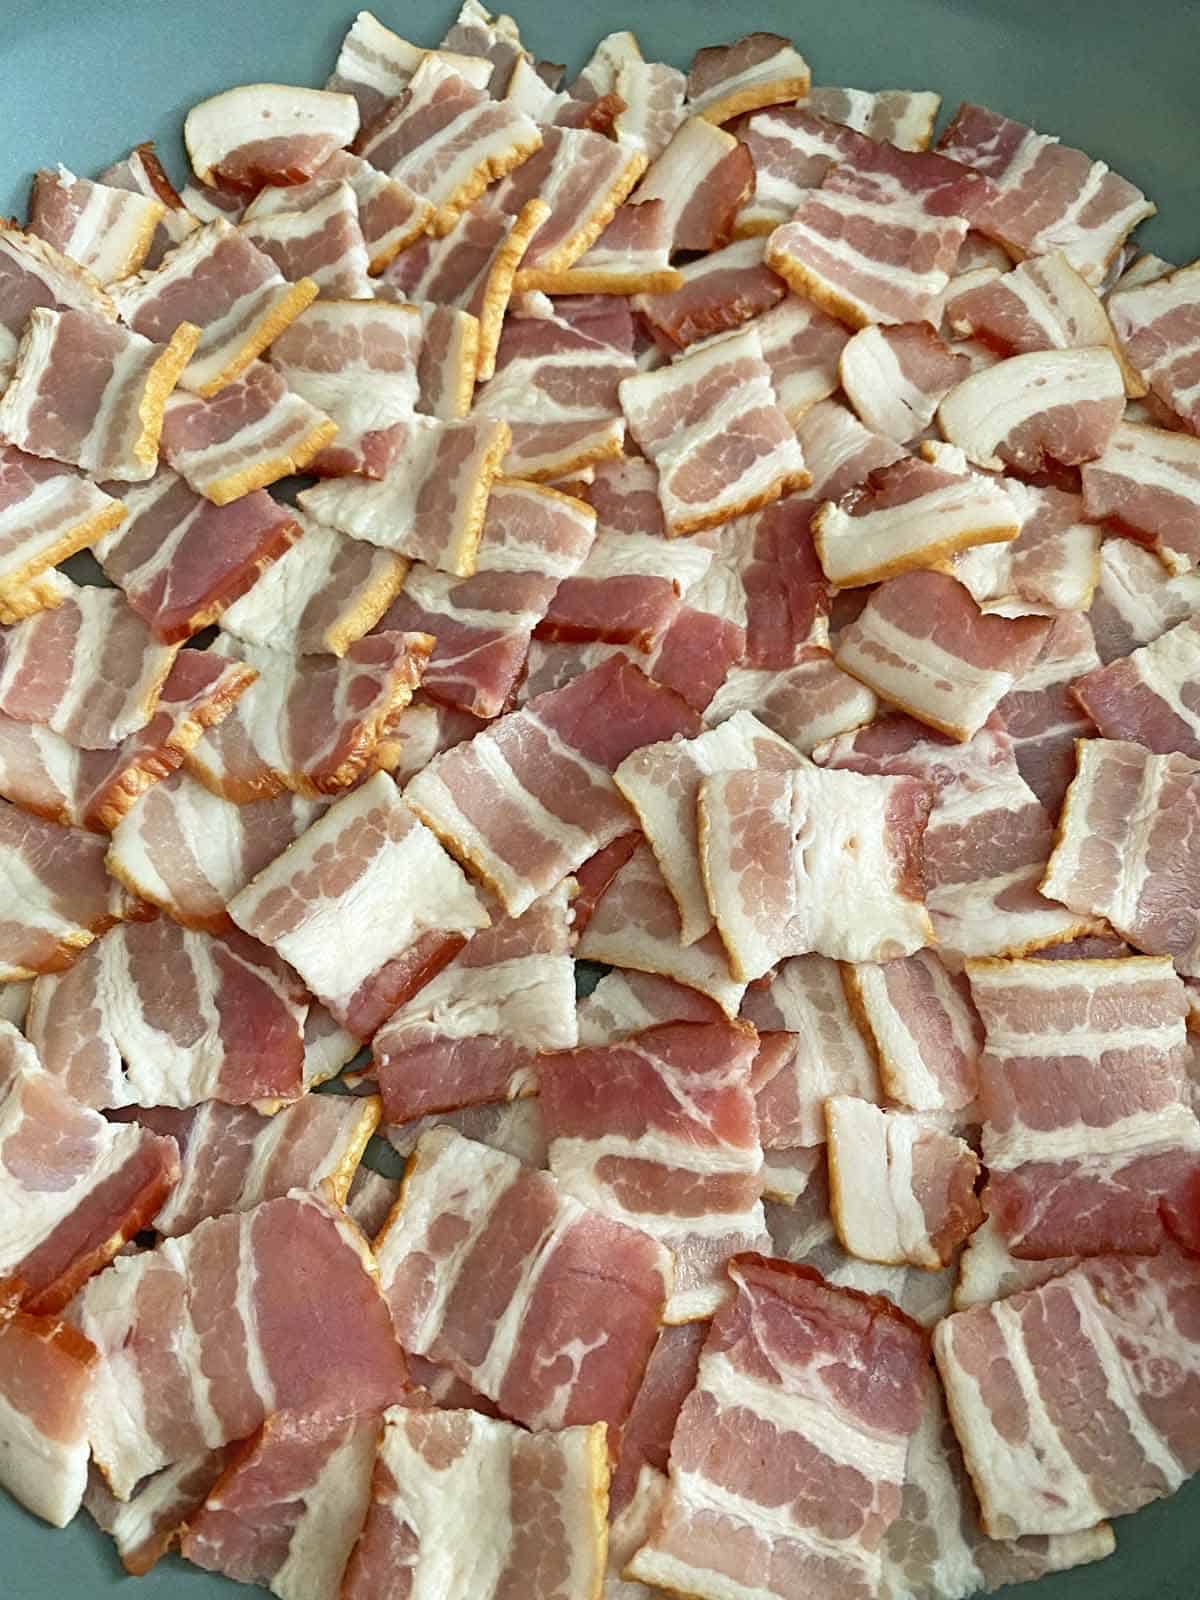 A pile of cut bacon pieces in a gray skillet.